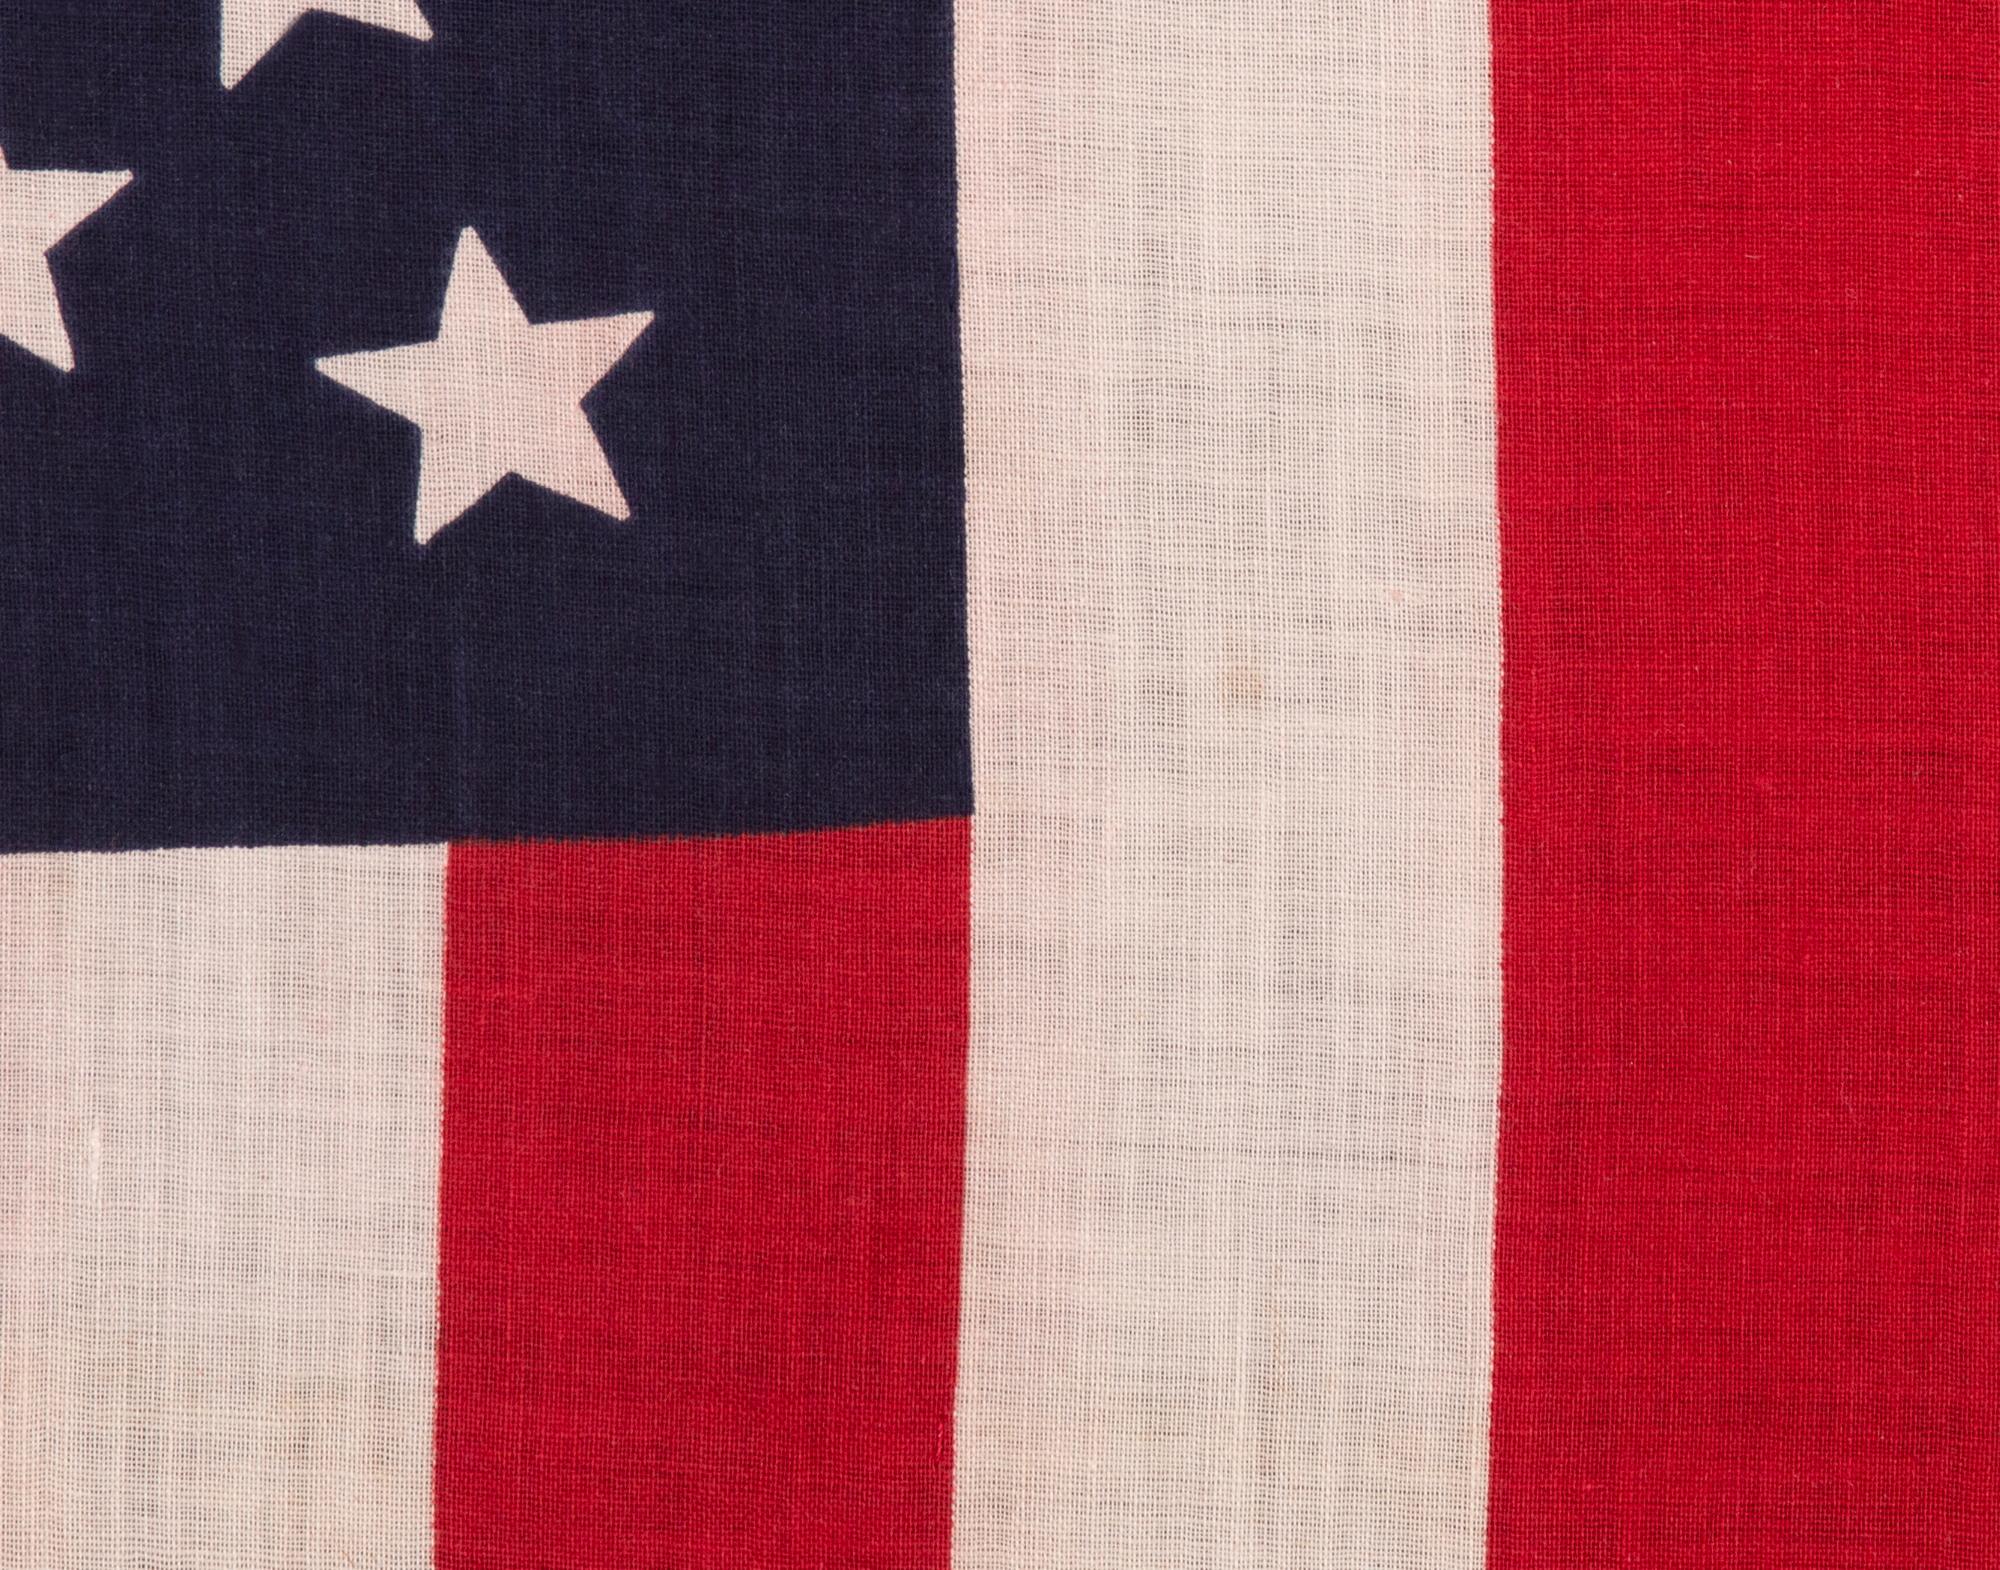 Late 19th Century 44 Star Antique American Flag, Stars in a Triple Wreath Pattern, Wyoming State For Sale